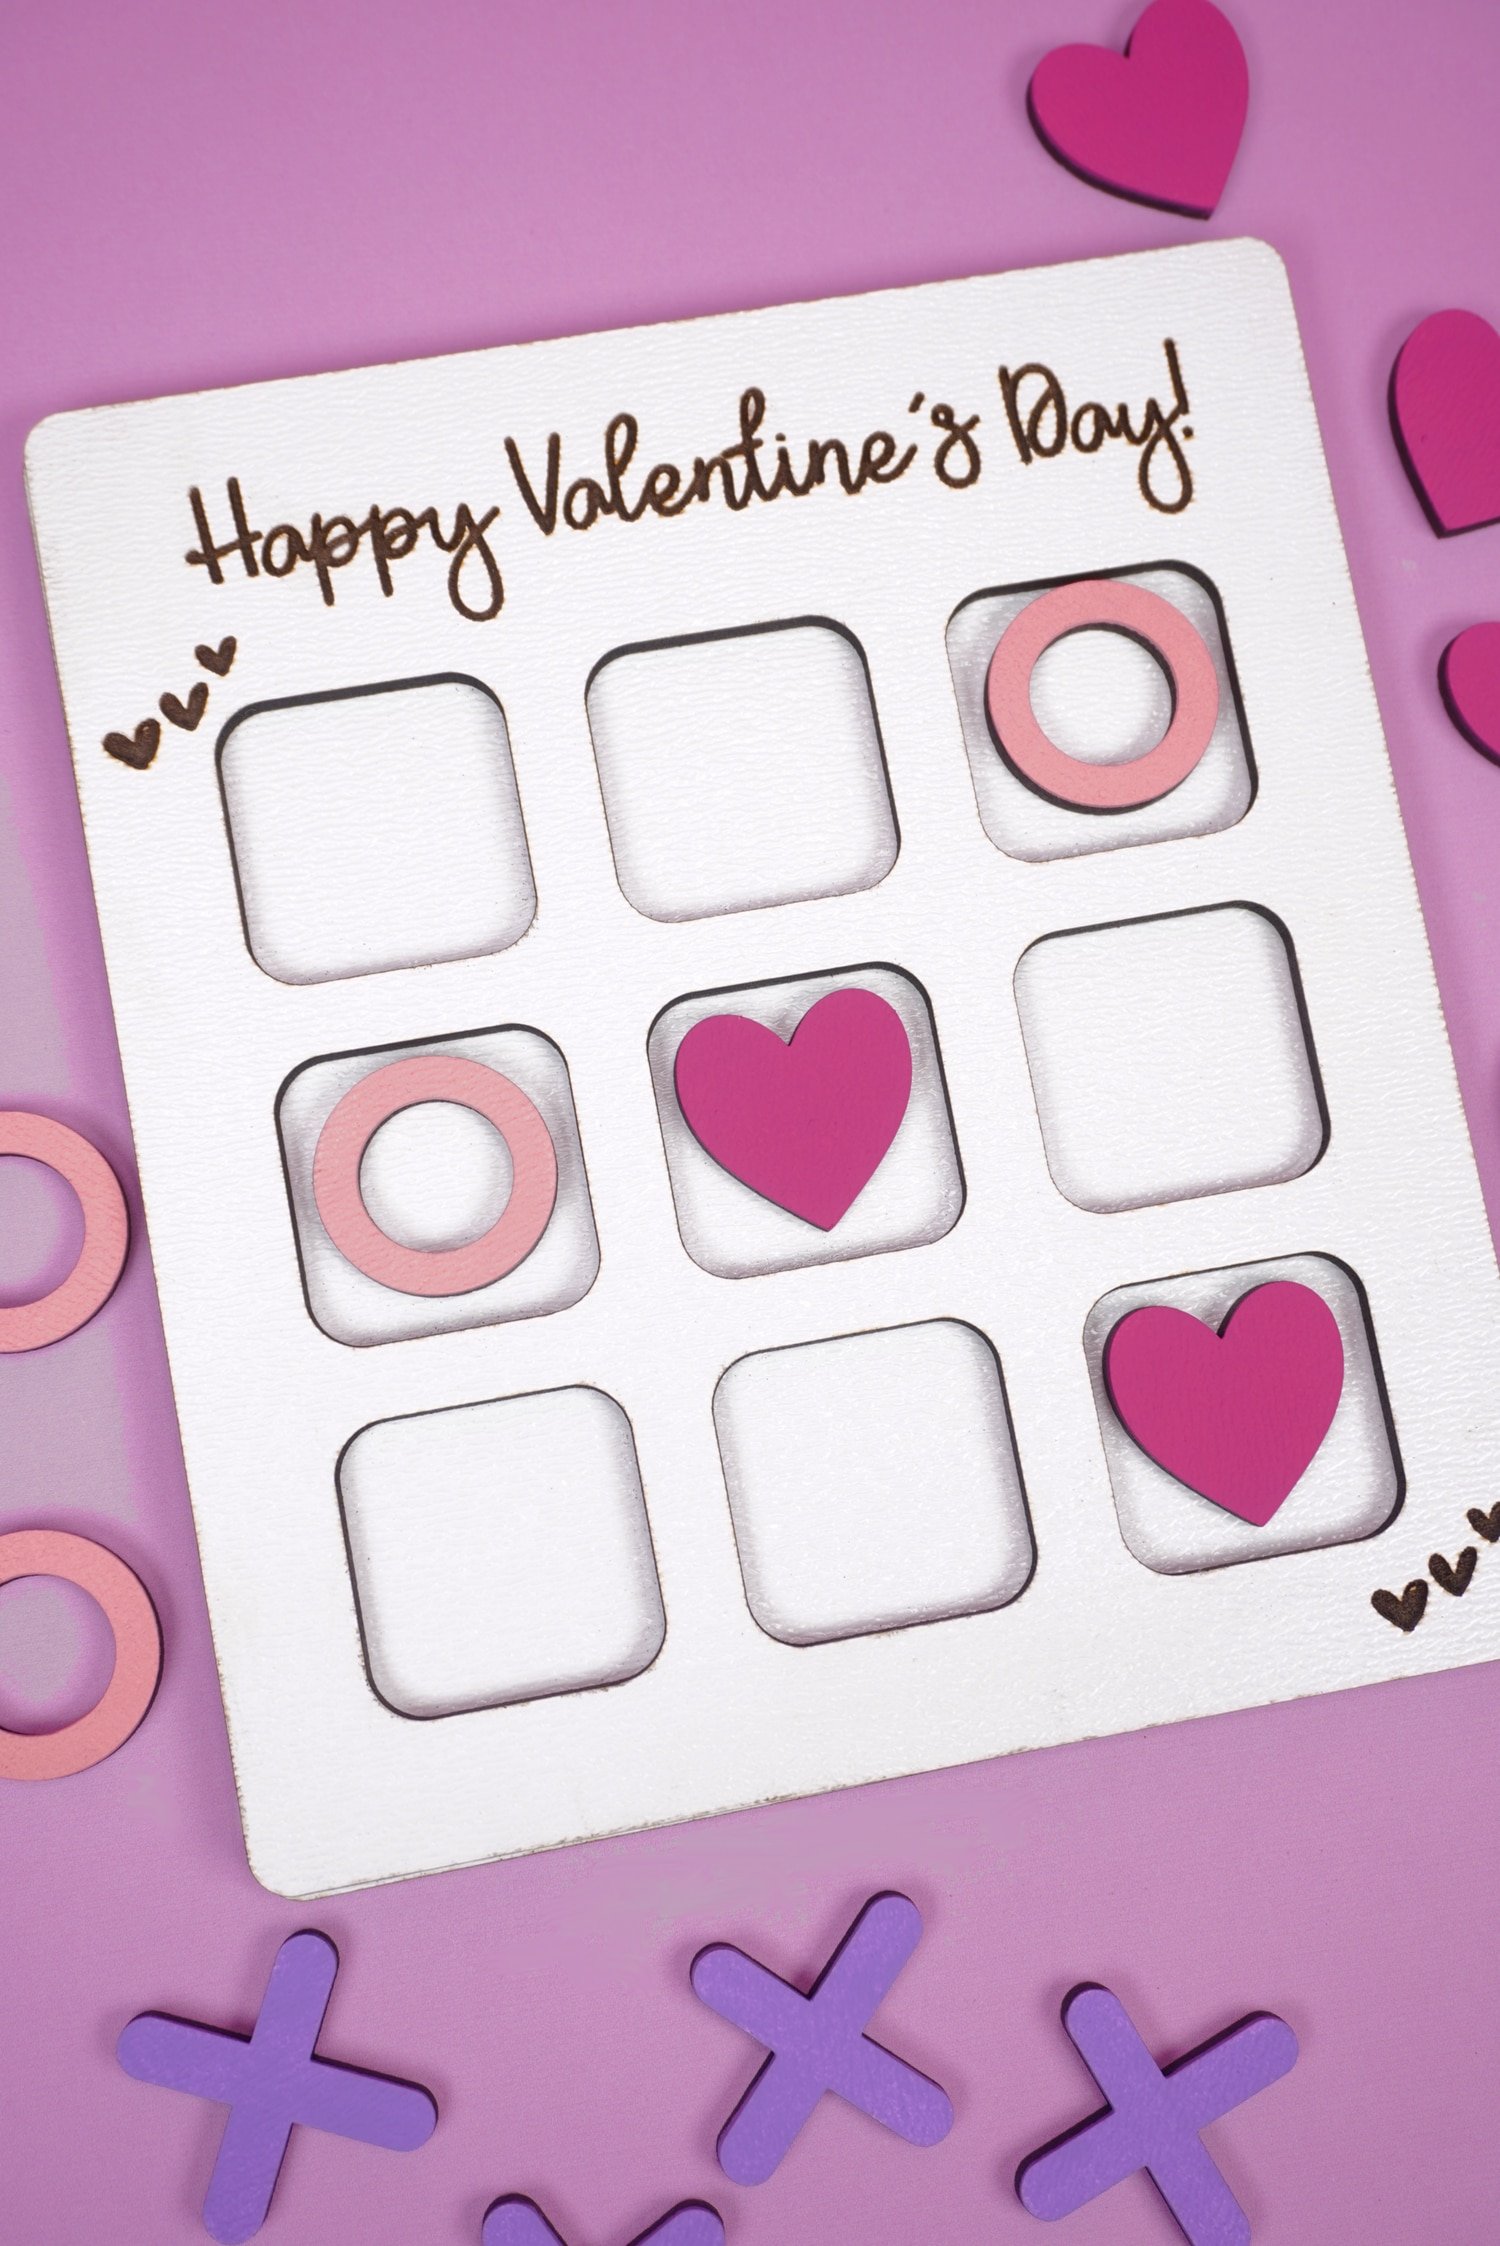 Valentine Tic Tac Toe game made with Glowforge laser SVG file on a light purple background with X's, O's, and pink hearts